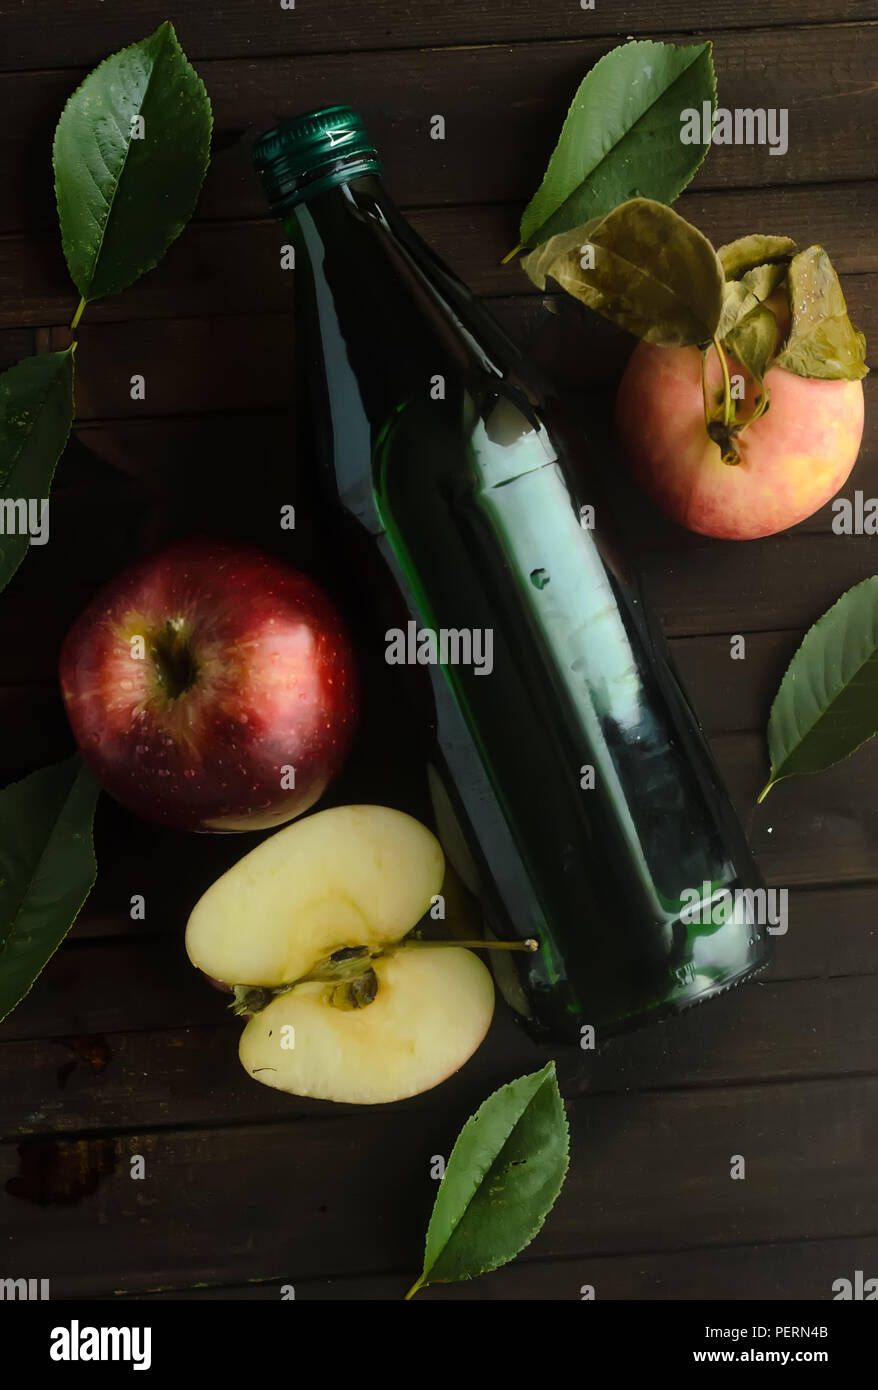 A bottle of a apple cider vinegar with fresh apples and green leaves on wooden background. Stock Photo